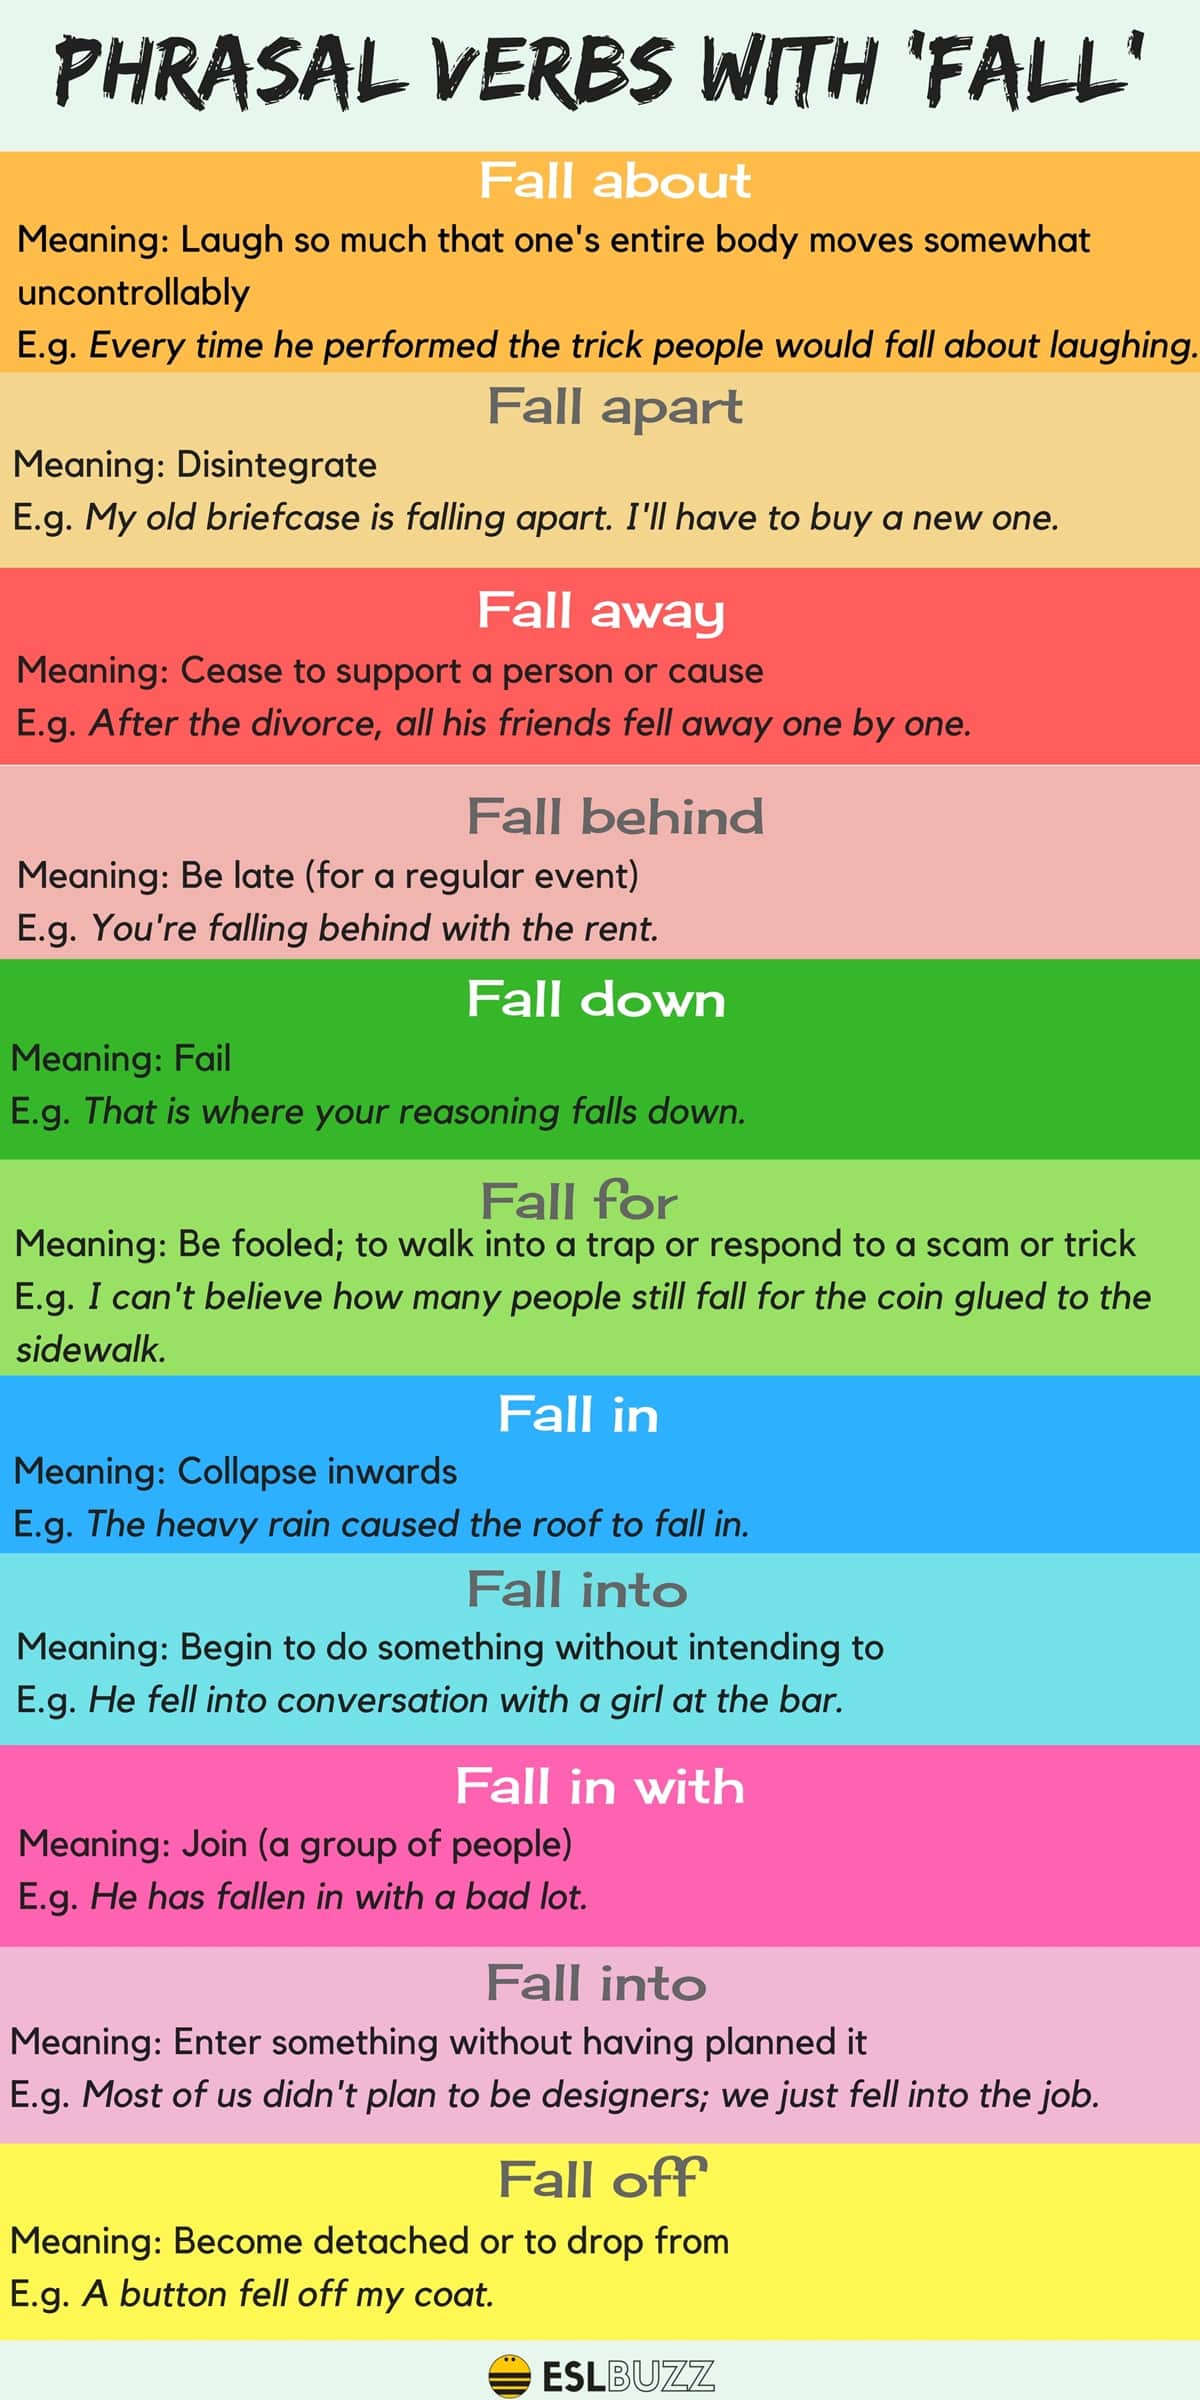 100+ of the Most Useful Phrasal Verbs in English (With Meaning & Examples) 7